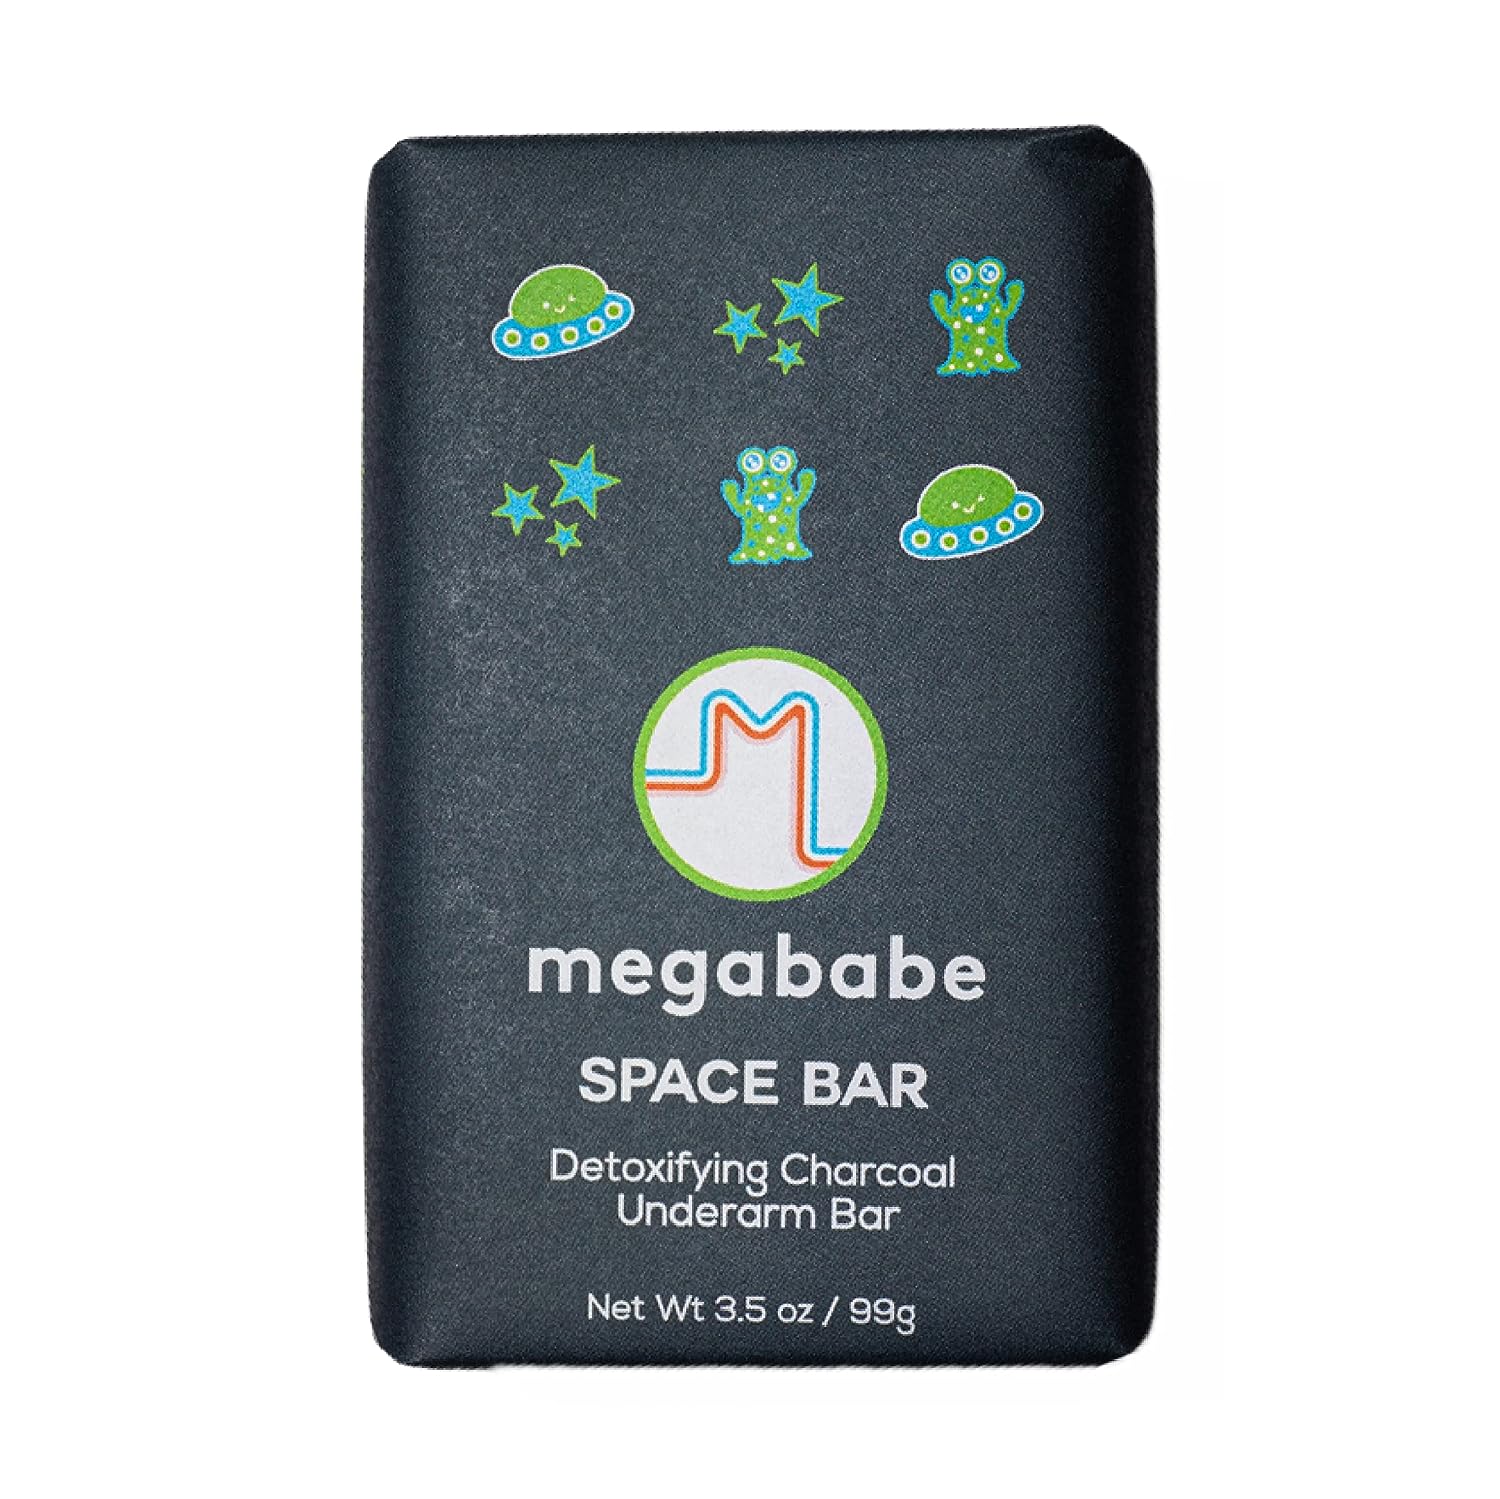 Megababe Underarm Bar Soap - Space Bar | With Detoxifying Charcoal for Odor Control | 3.5